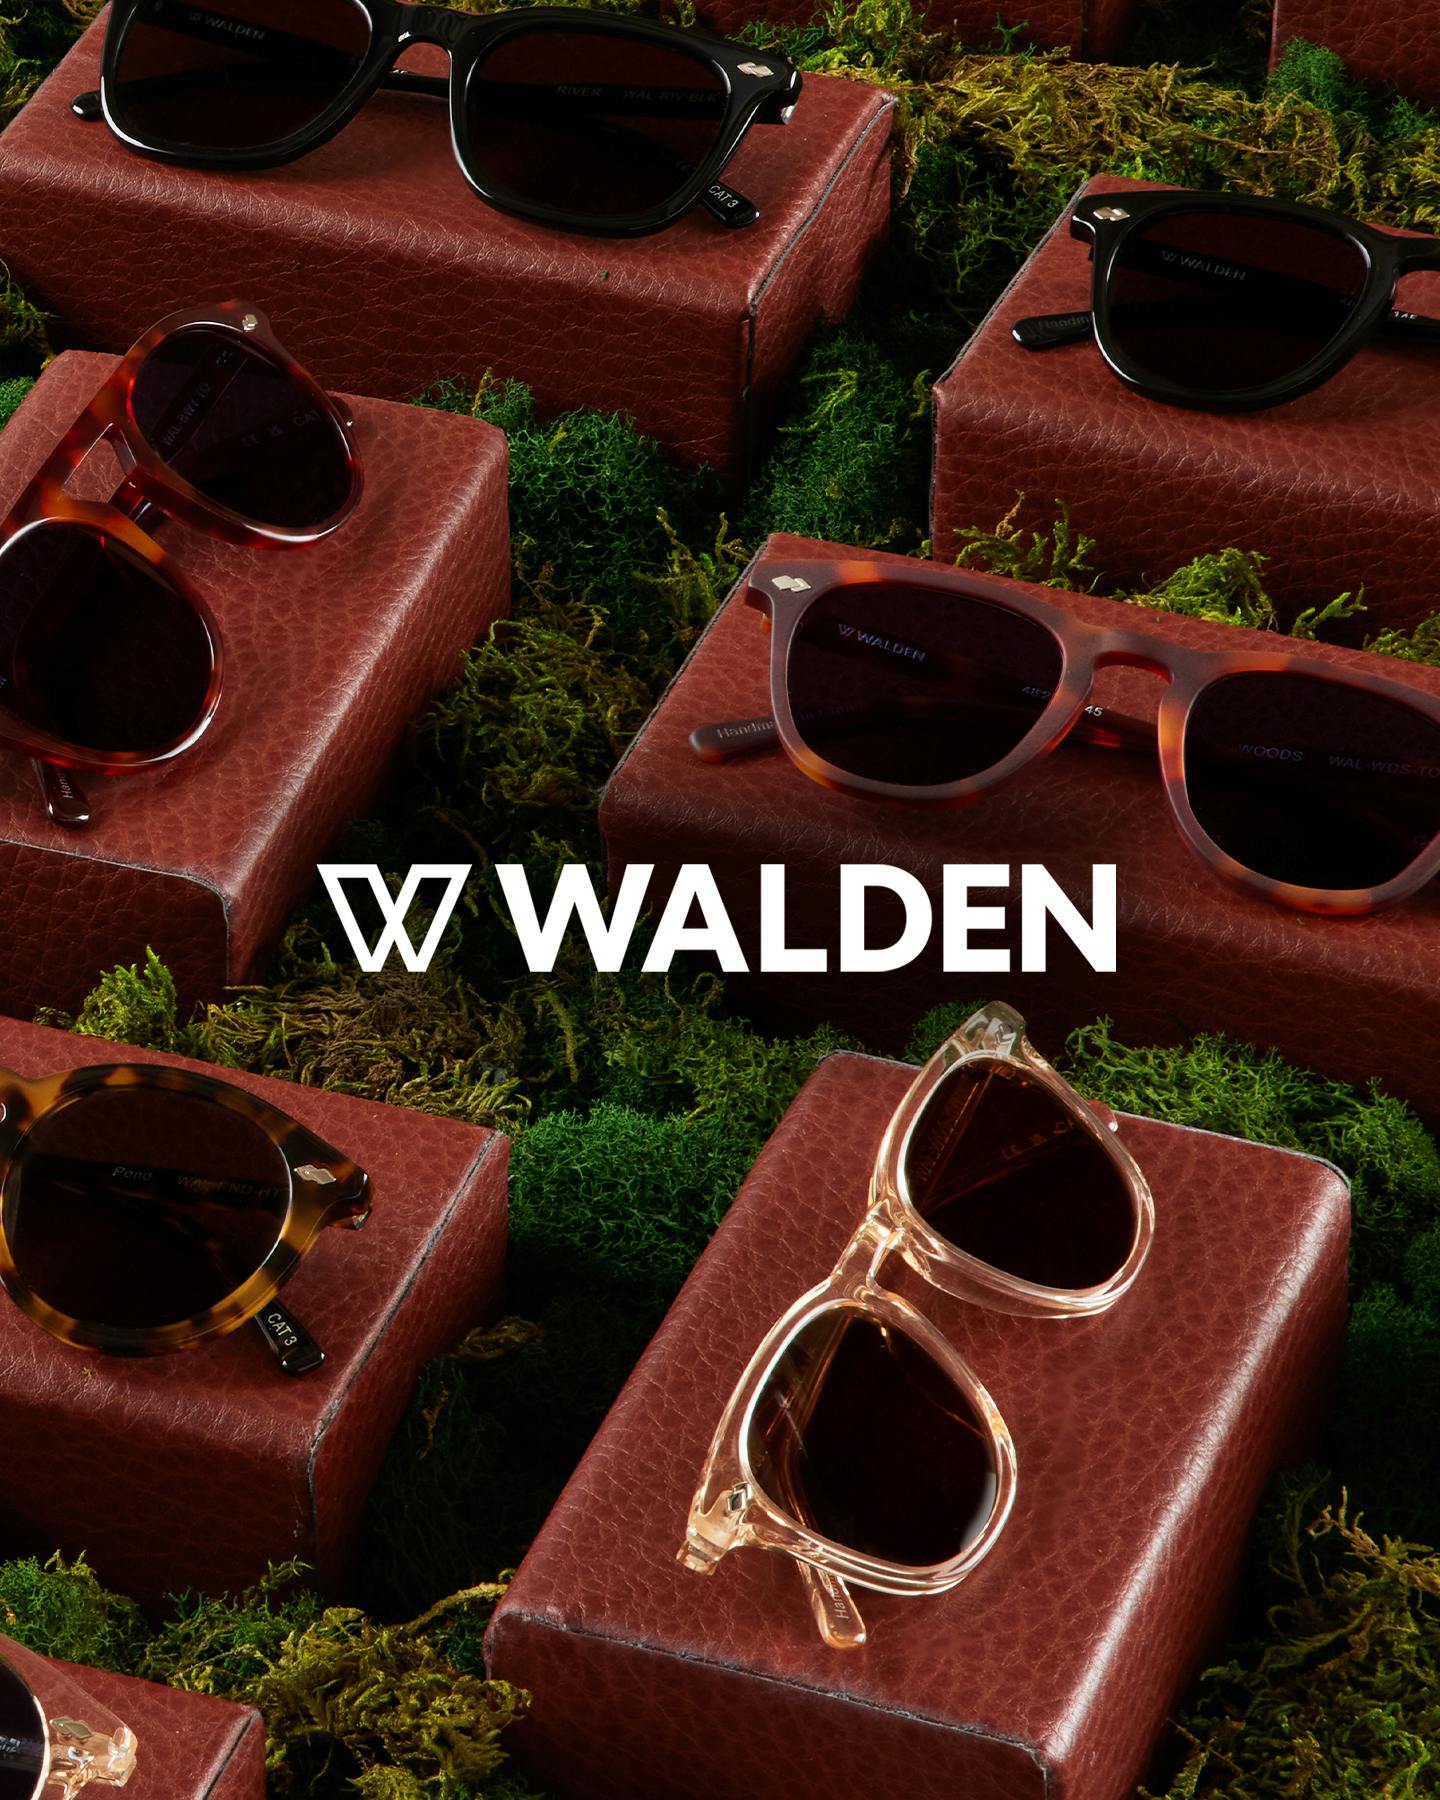 Walden sunglasses laying in green moss texture and leather cases